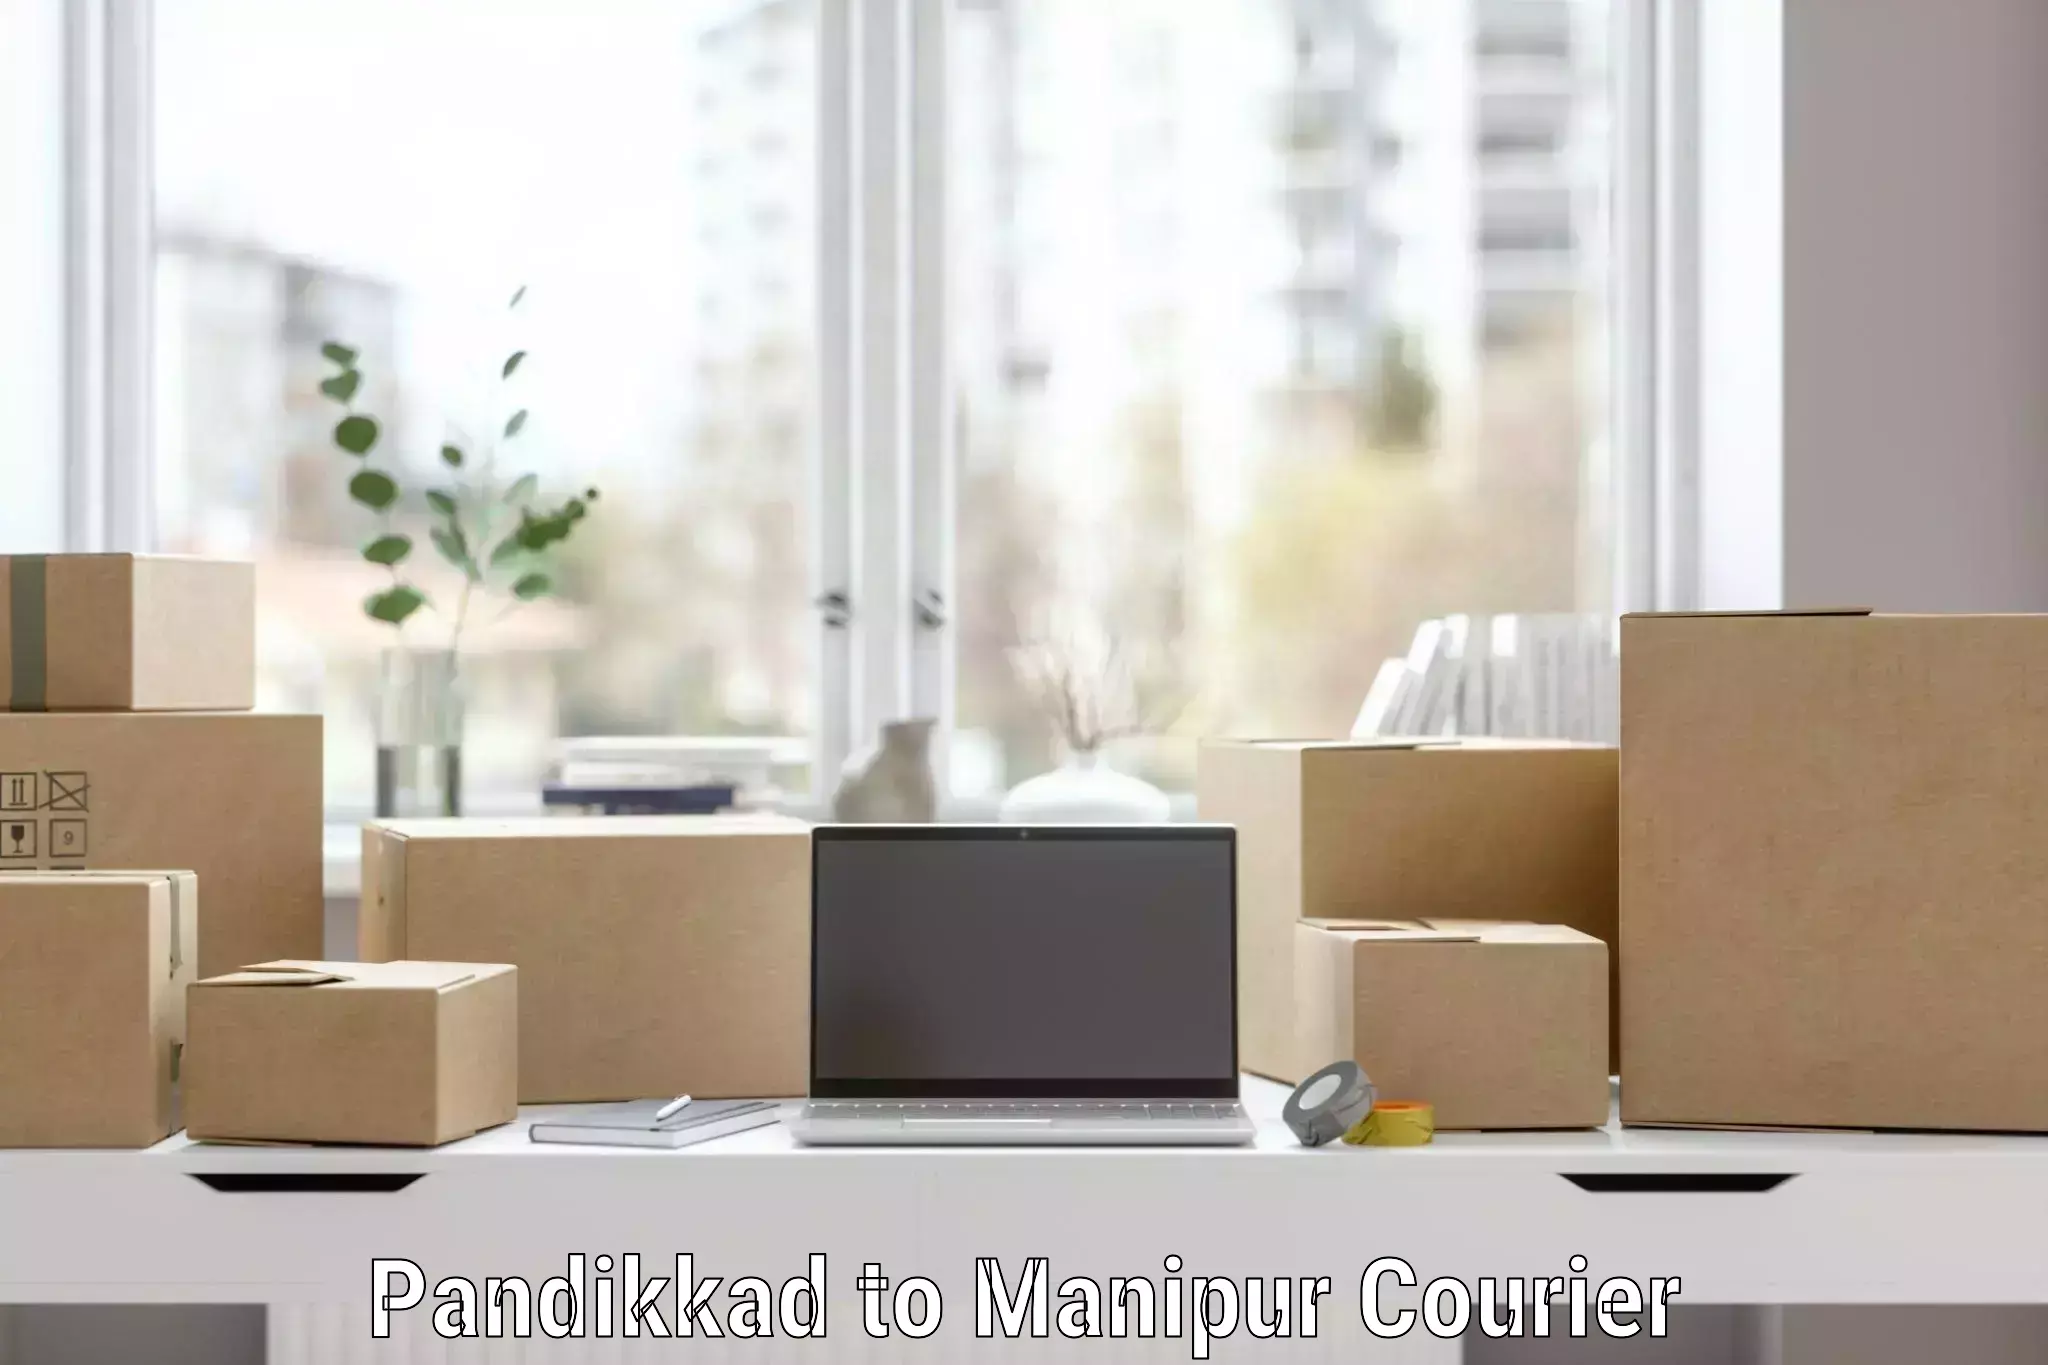 Professional packing services Pandikkad to Imphal